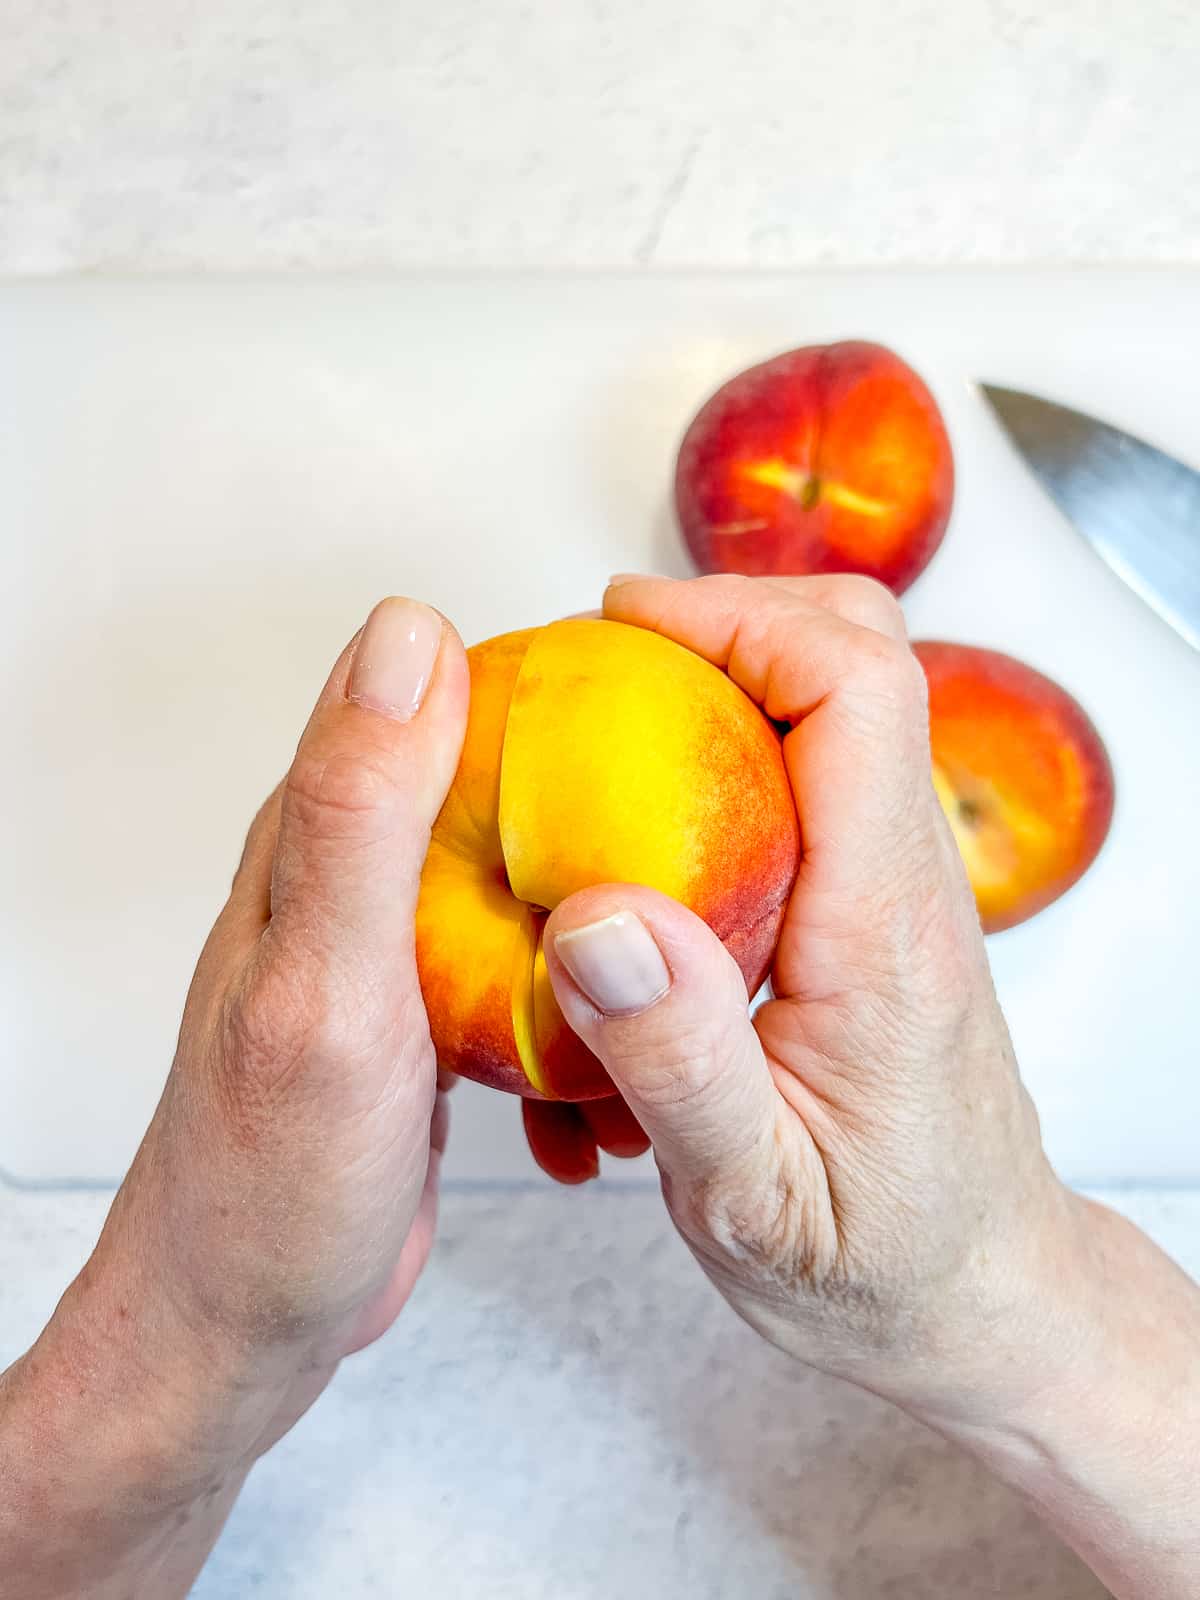 Twisting a sliced peach to remove pit.